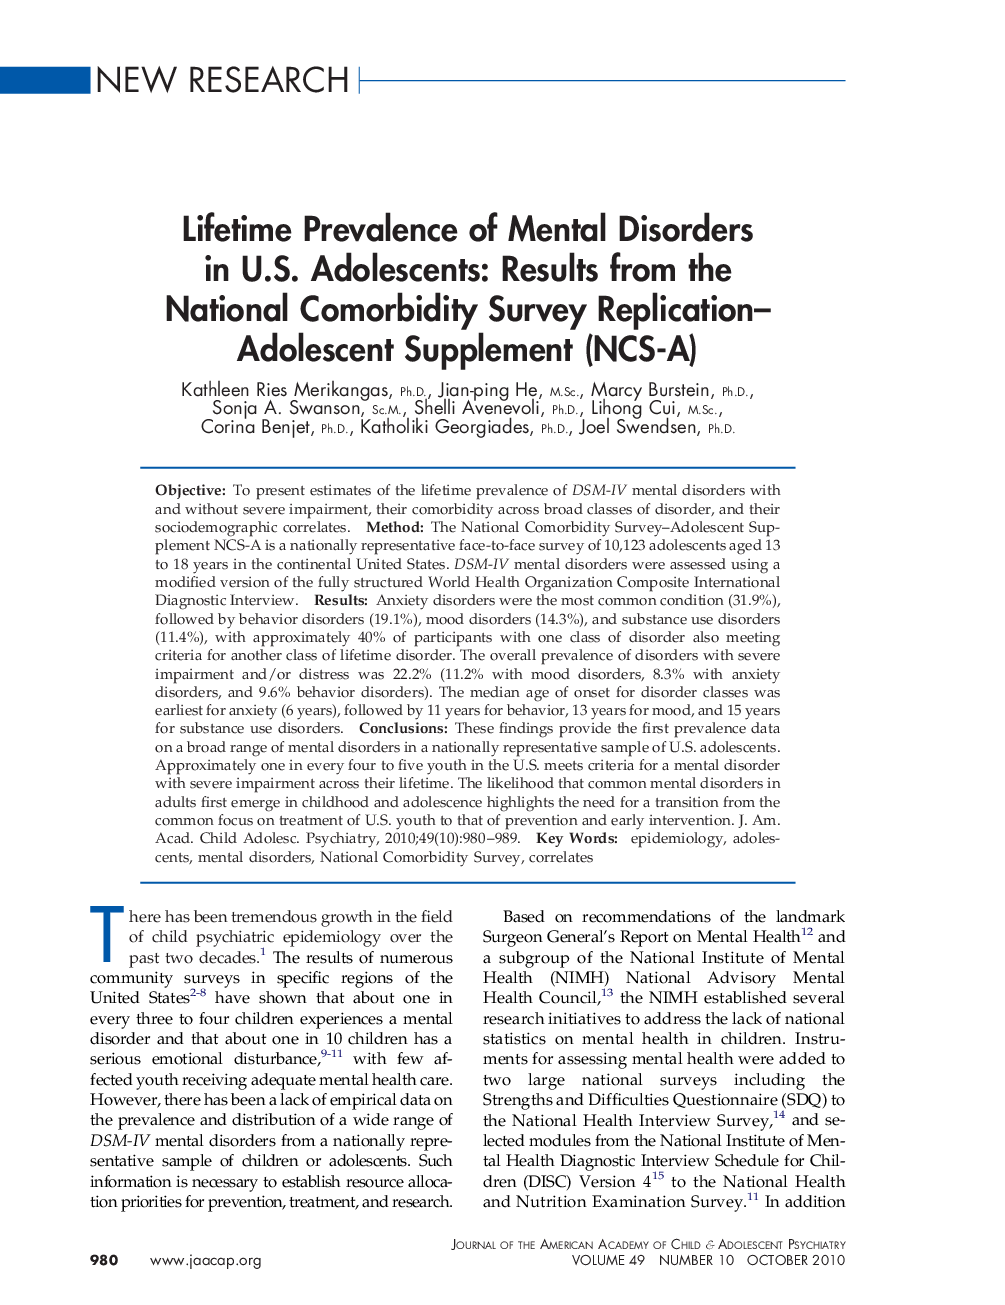 Lifetime Prevalence of Mental Disorders in U.S. Adolescents: Results from the National Comorbidity Survey Replication–Adolescent Supplement (NCS-A) 